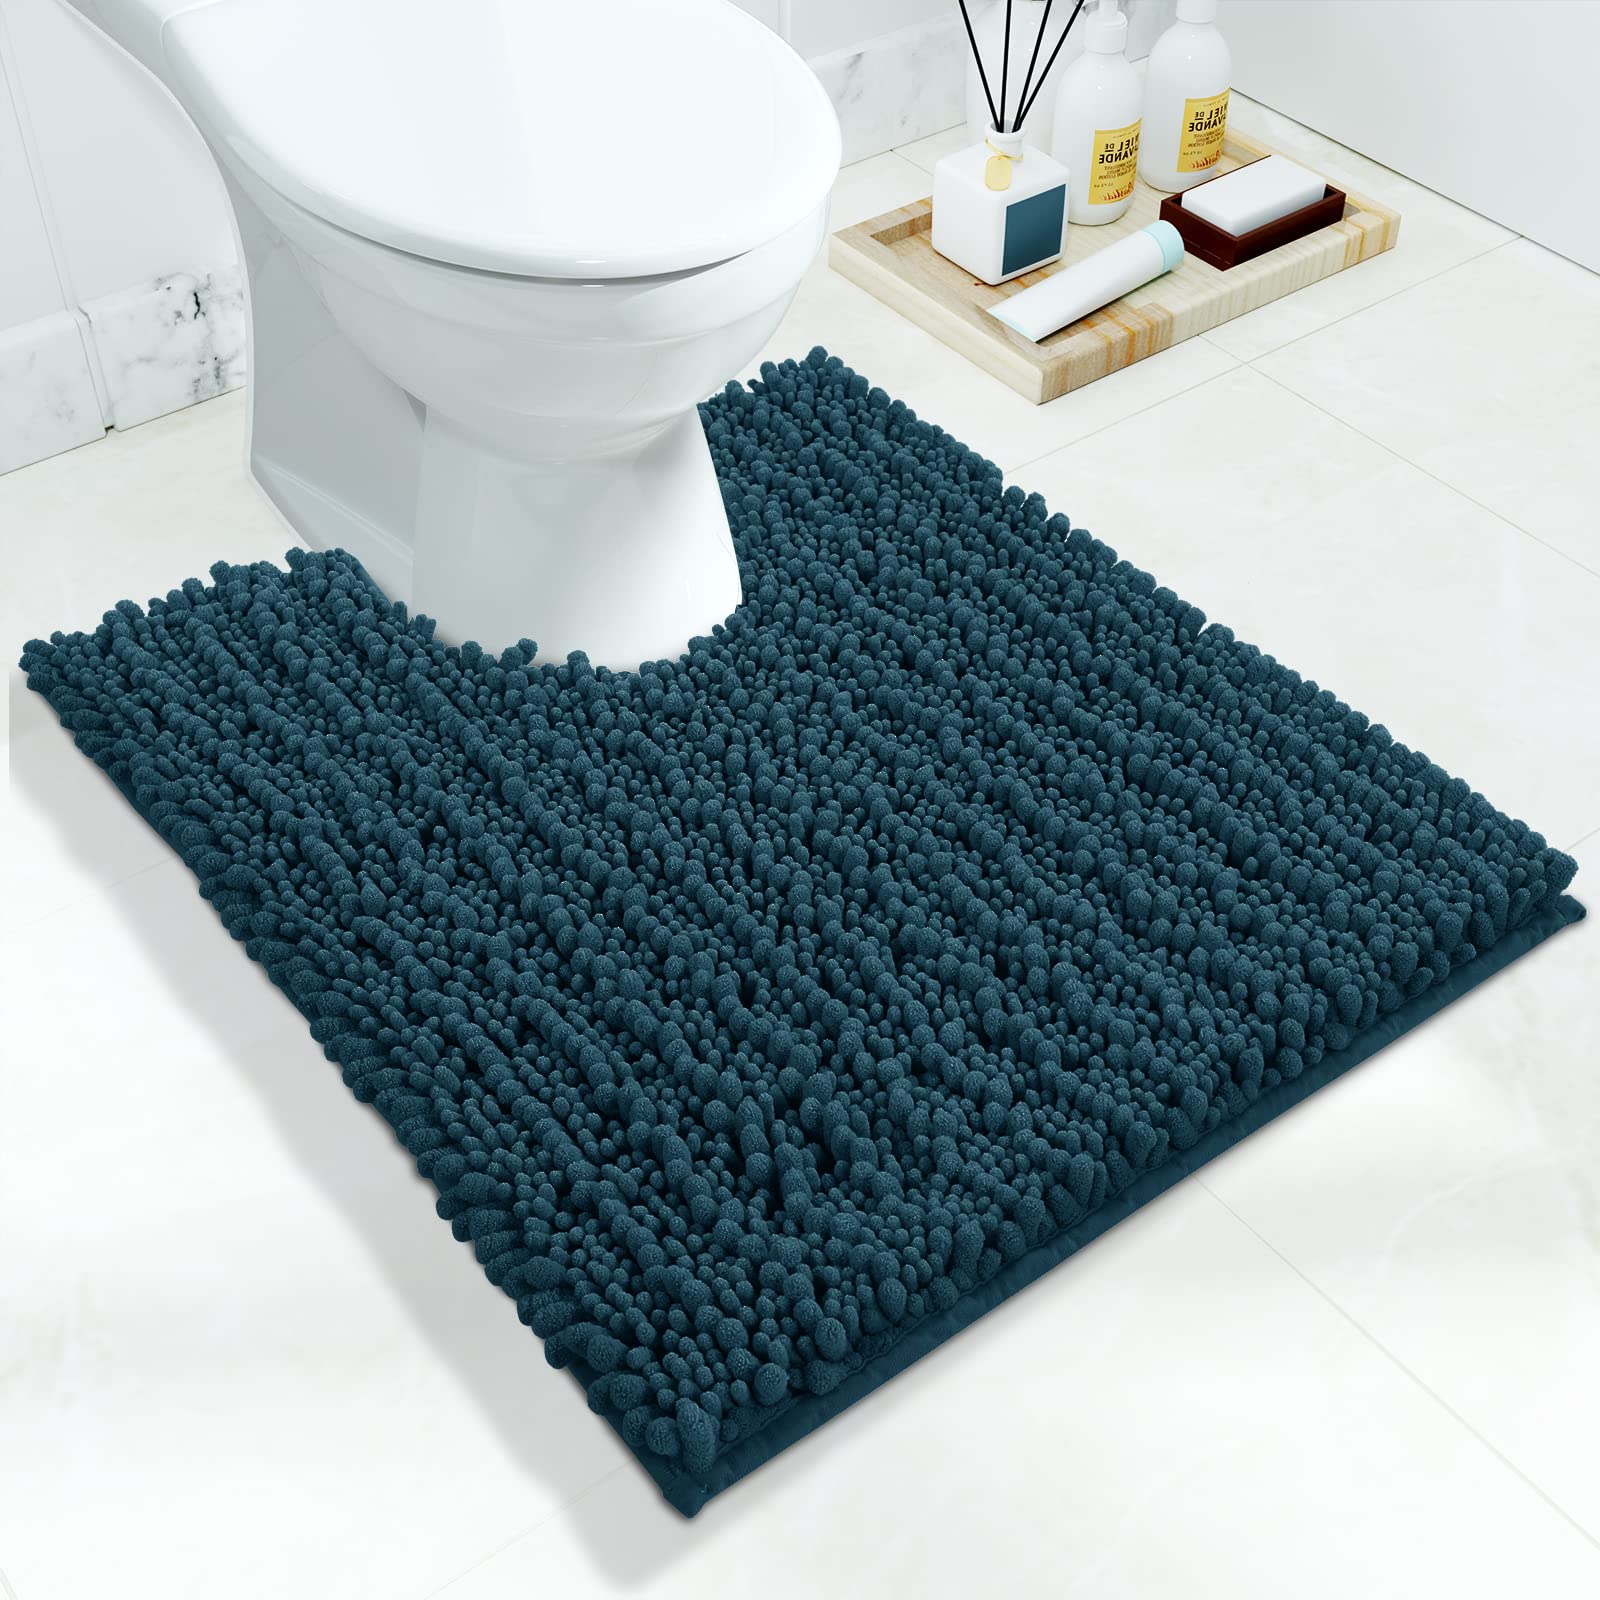 Book Cover Yimobra Luxury Shaggy Toilet Bath Mat U-Shaped Contour Rugs for Bathroom, 24.4 X 20.4 Inches, Soft and Comfortable, Maximum Absorbent, Dry Quickly, Non-Slip, Machine-Washable, Peacock Blue Peacock Blue 20.4